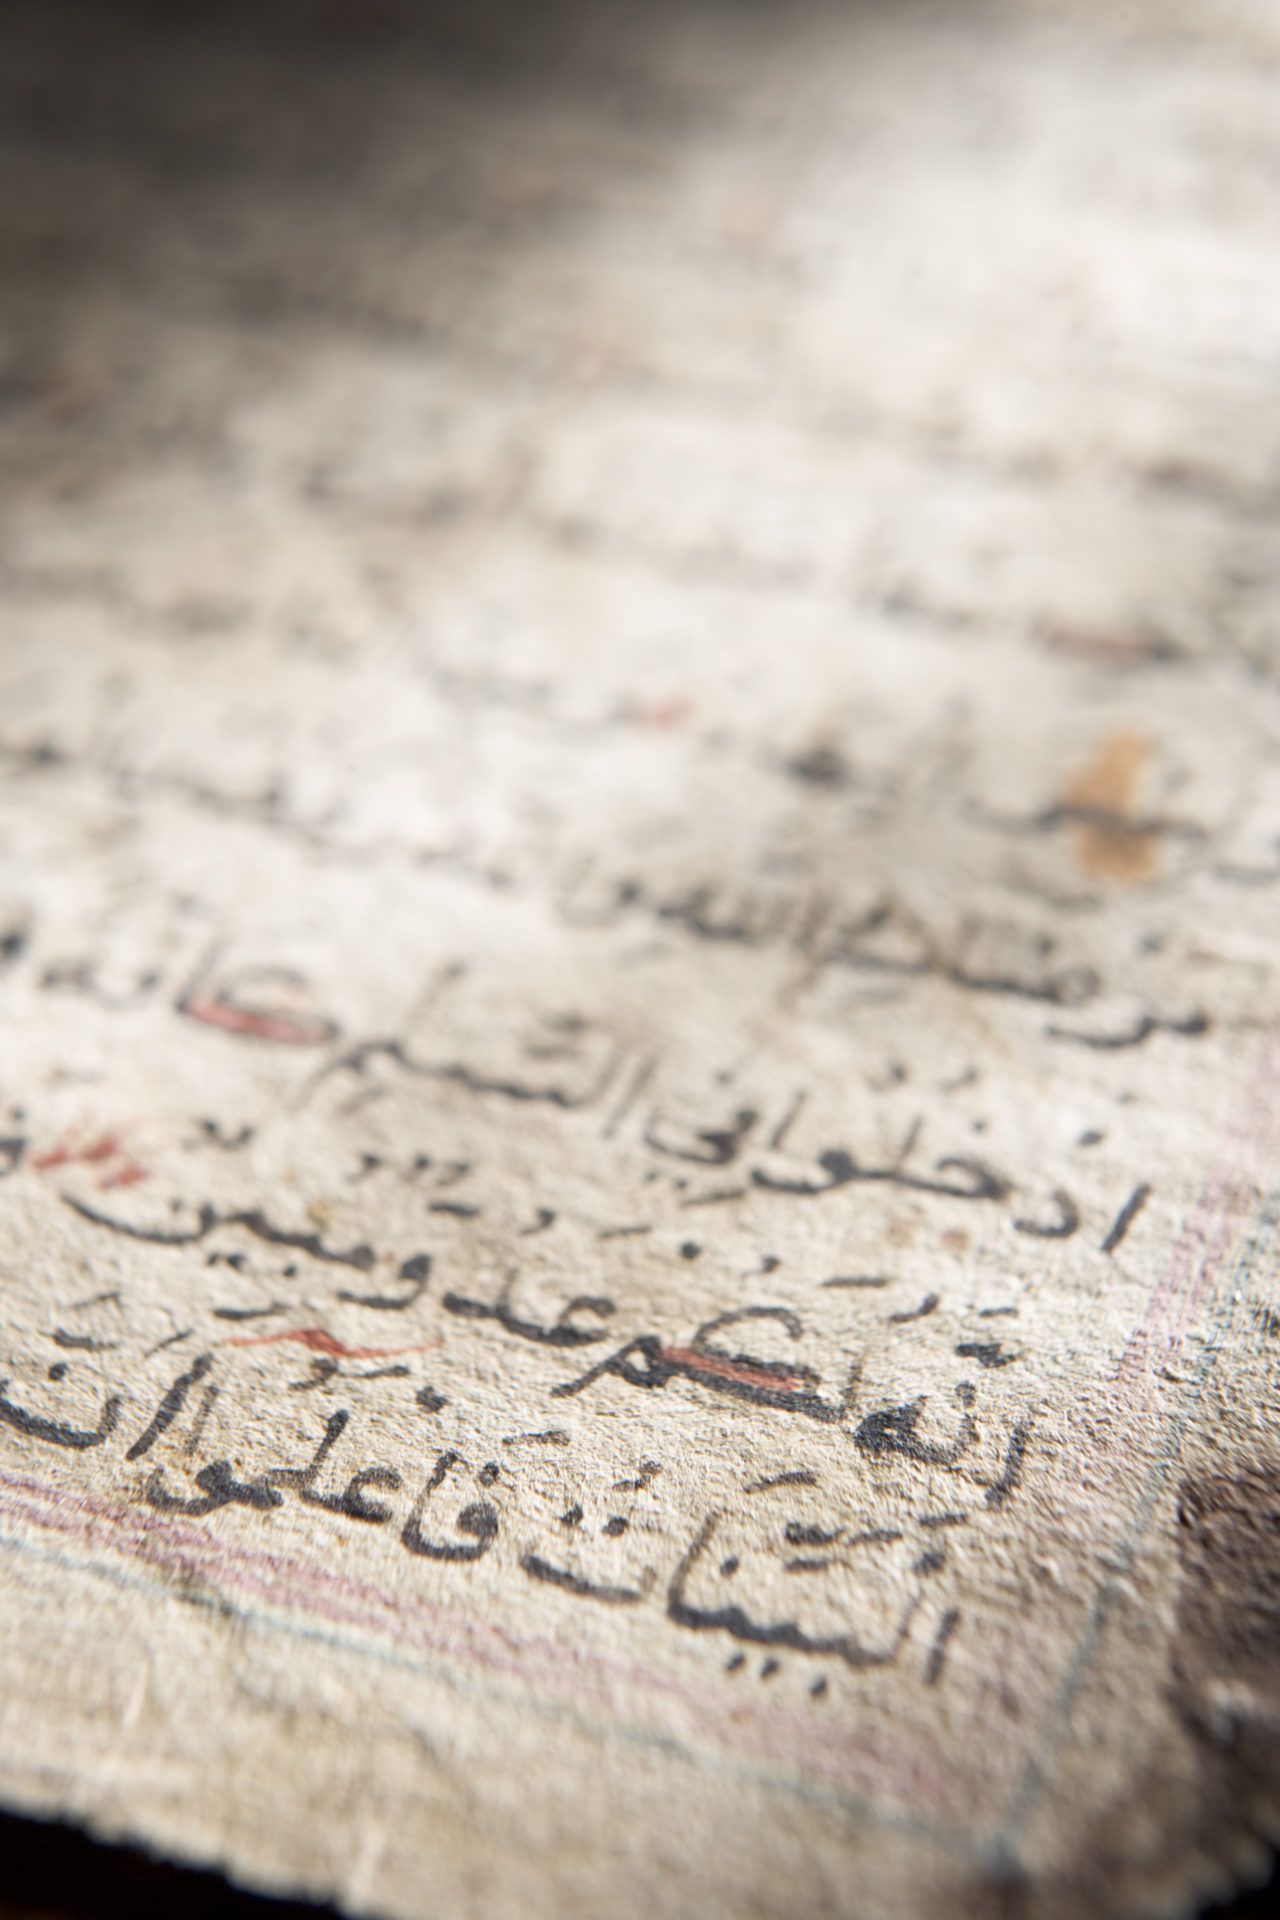 Letter to the Editor: Quran Verses Taken Out of Context